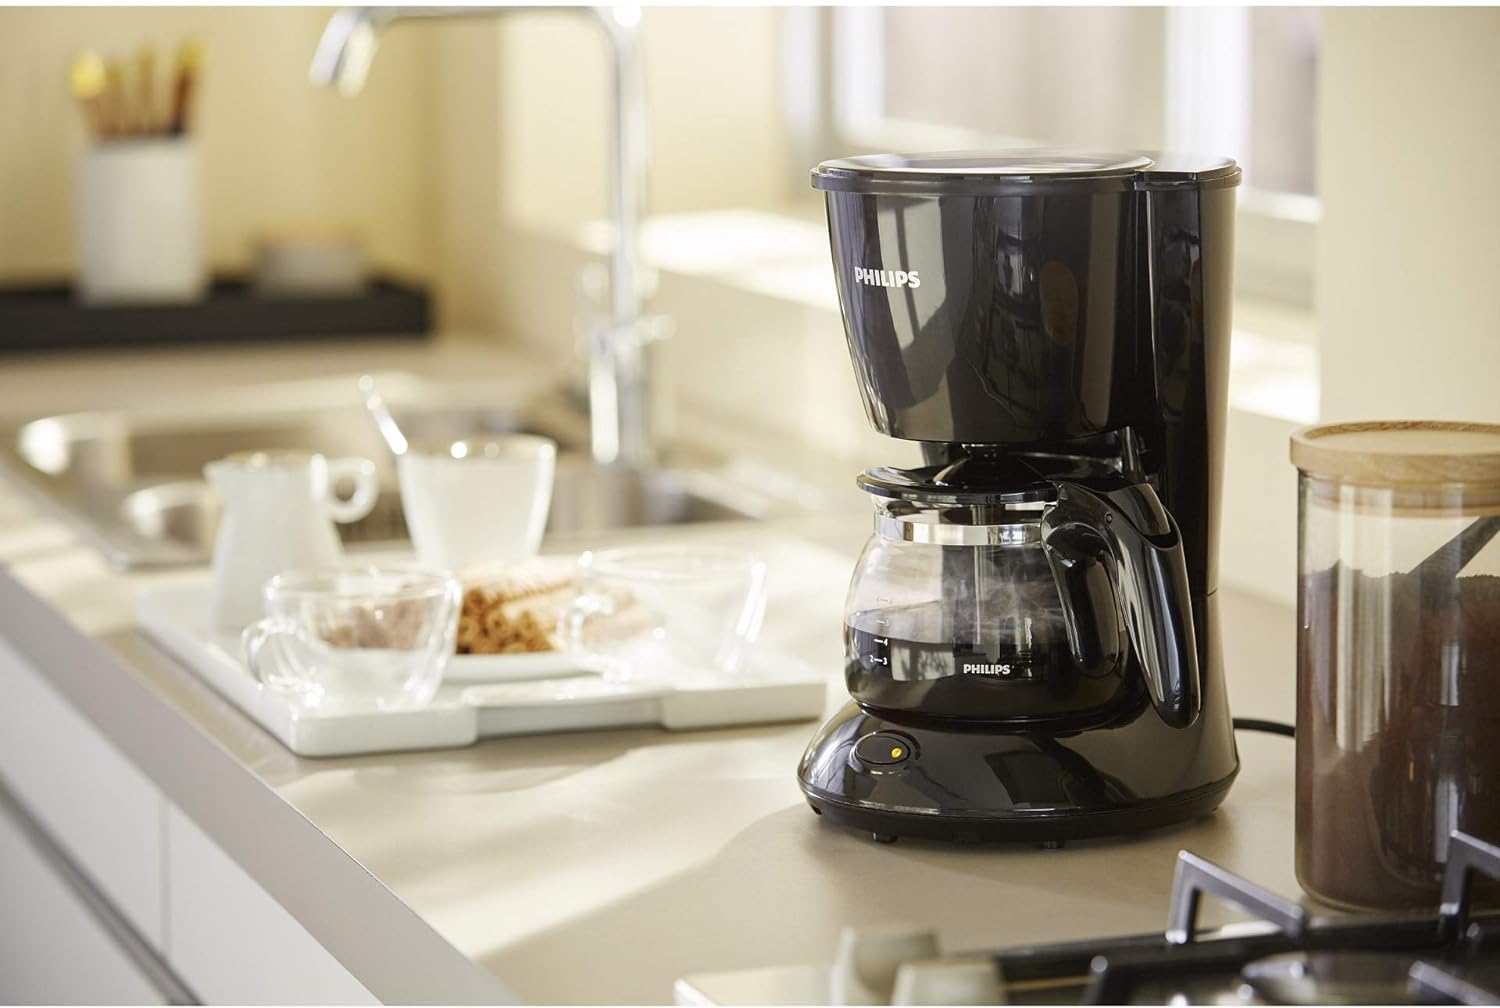 PHILIPS Coffee Maker 0.6 Litre Glass Jug for up to 7 cups - Automatic shut-off after 30 min - No Filter Included - ‎HD7432/20